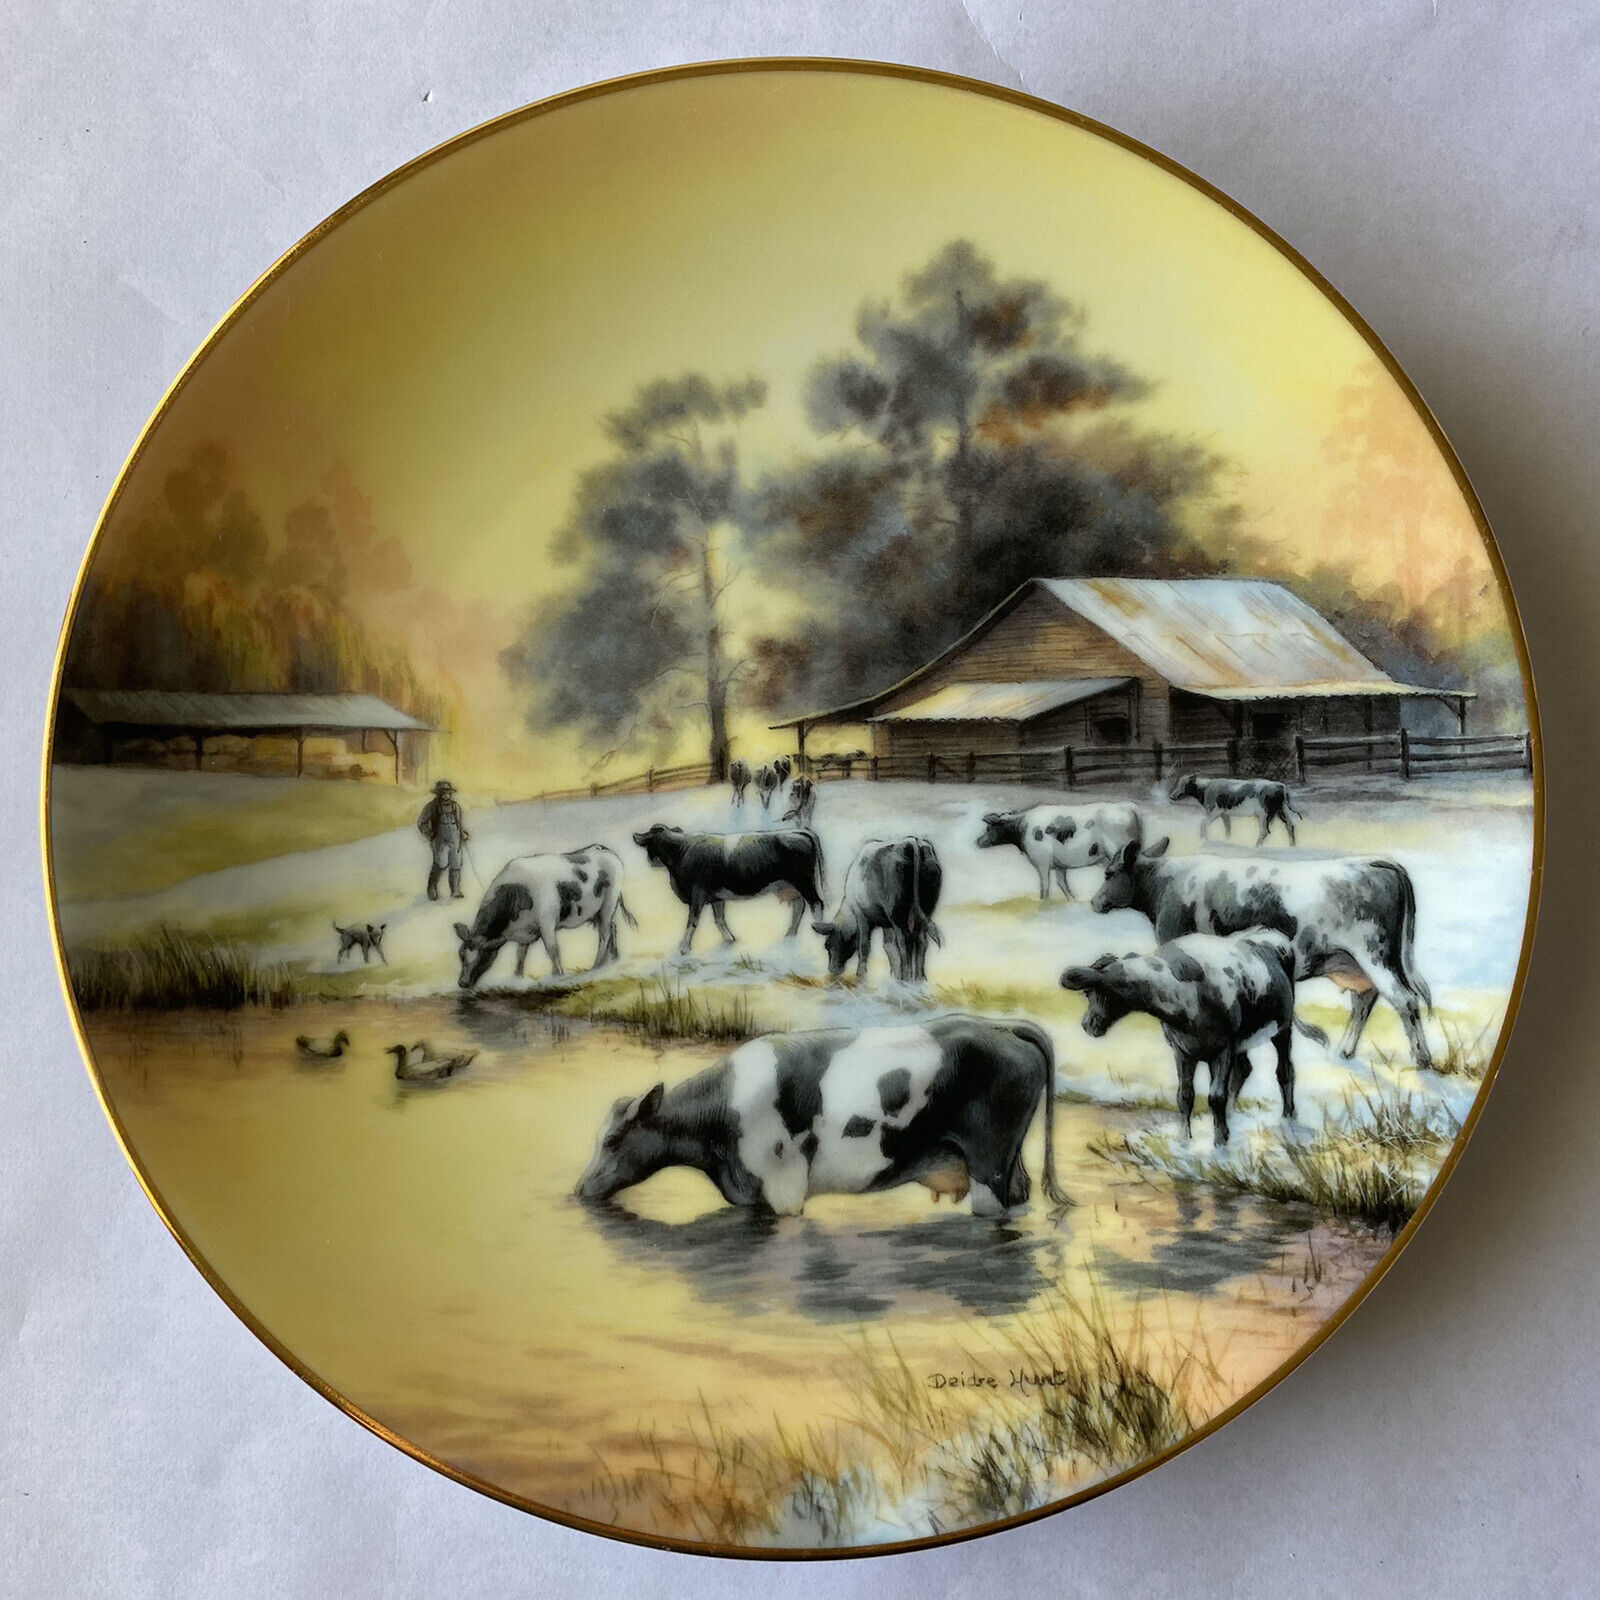 The Collectors Treasury 21.5cm Collectors Plate “In For Milking”  By Deidre Hunt